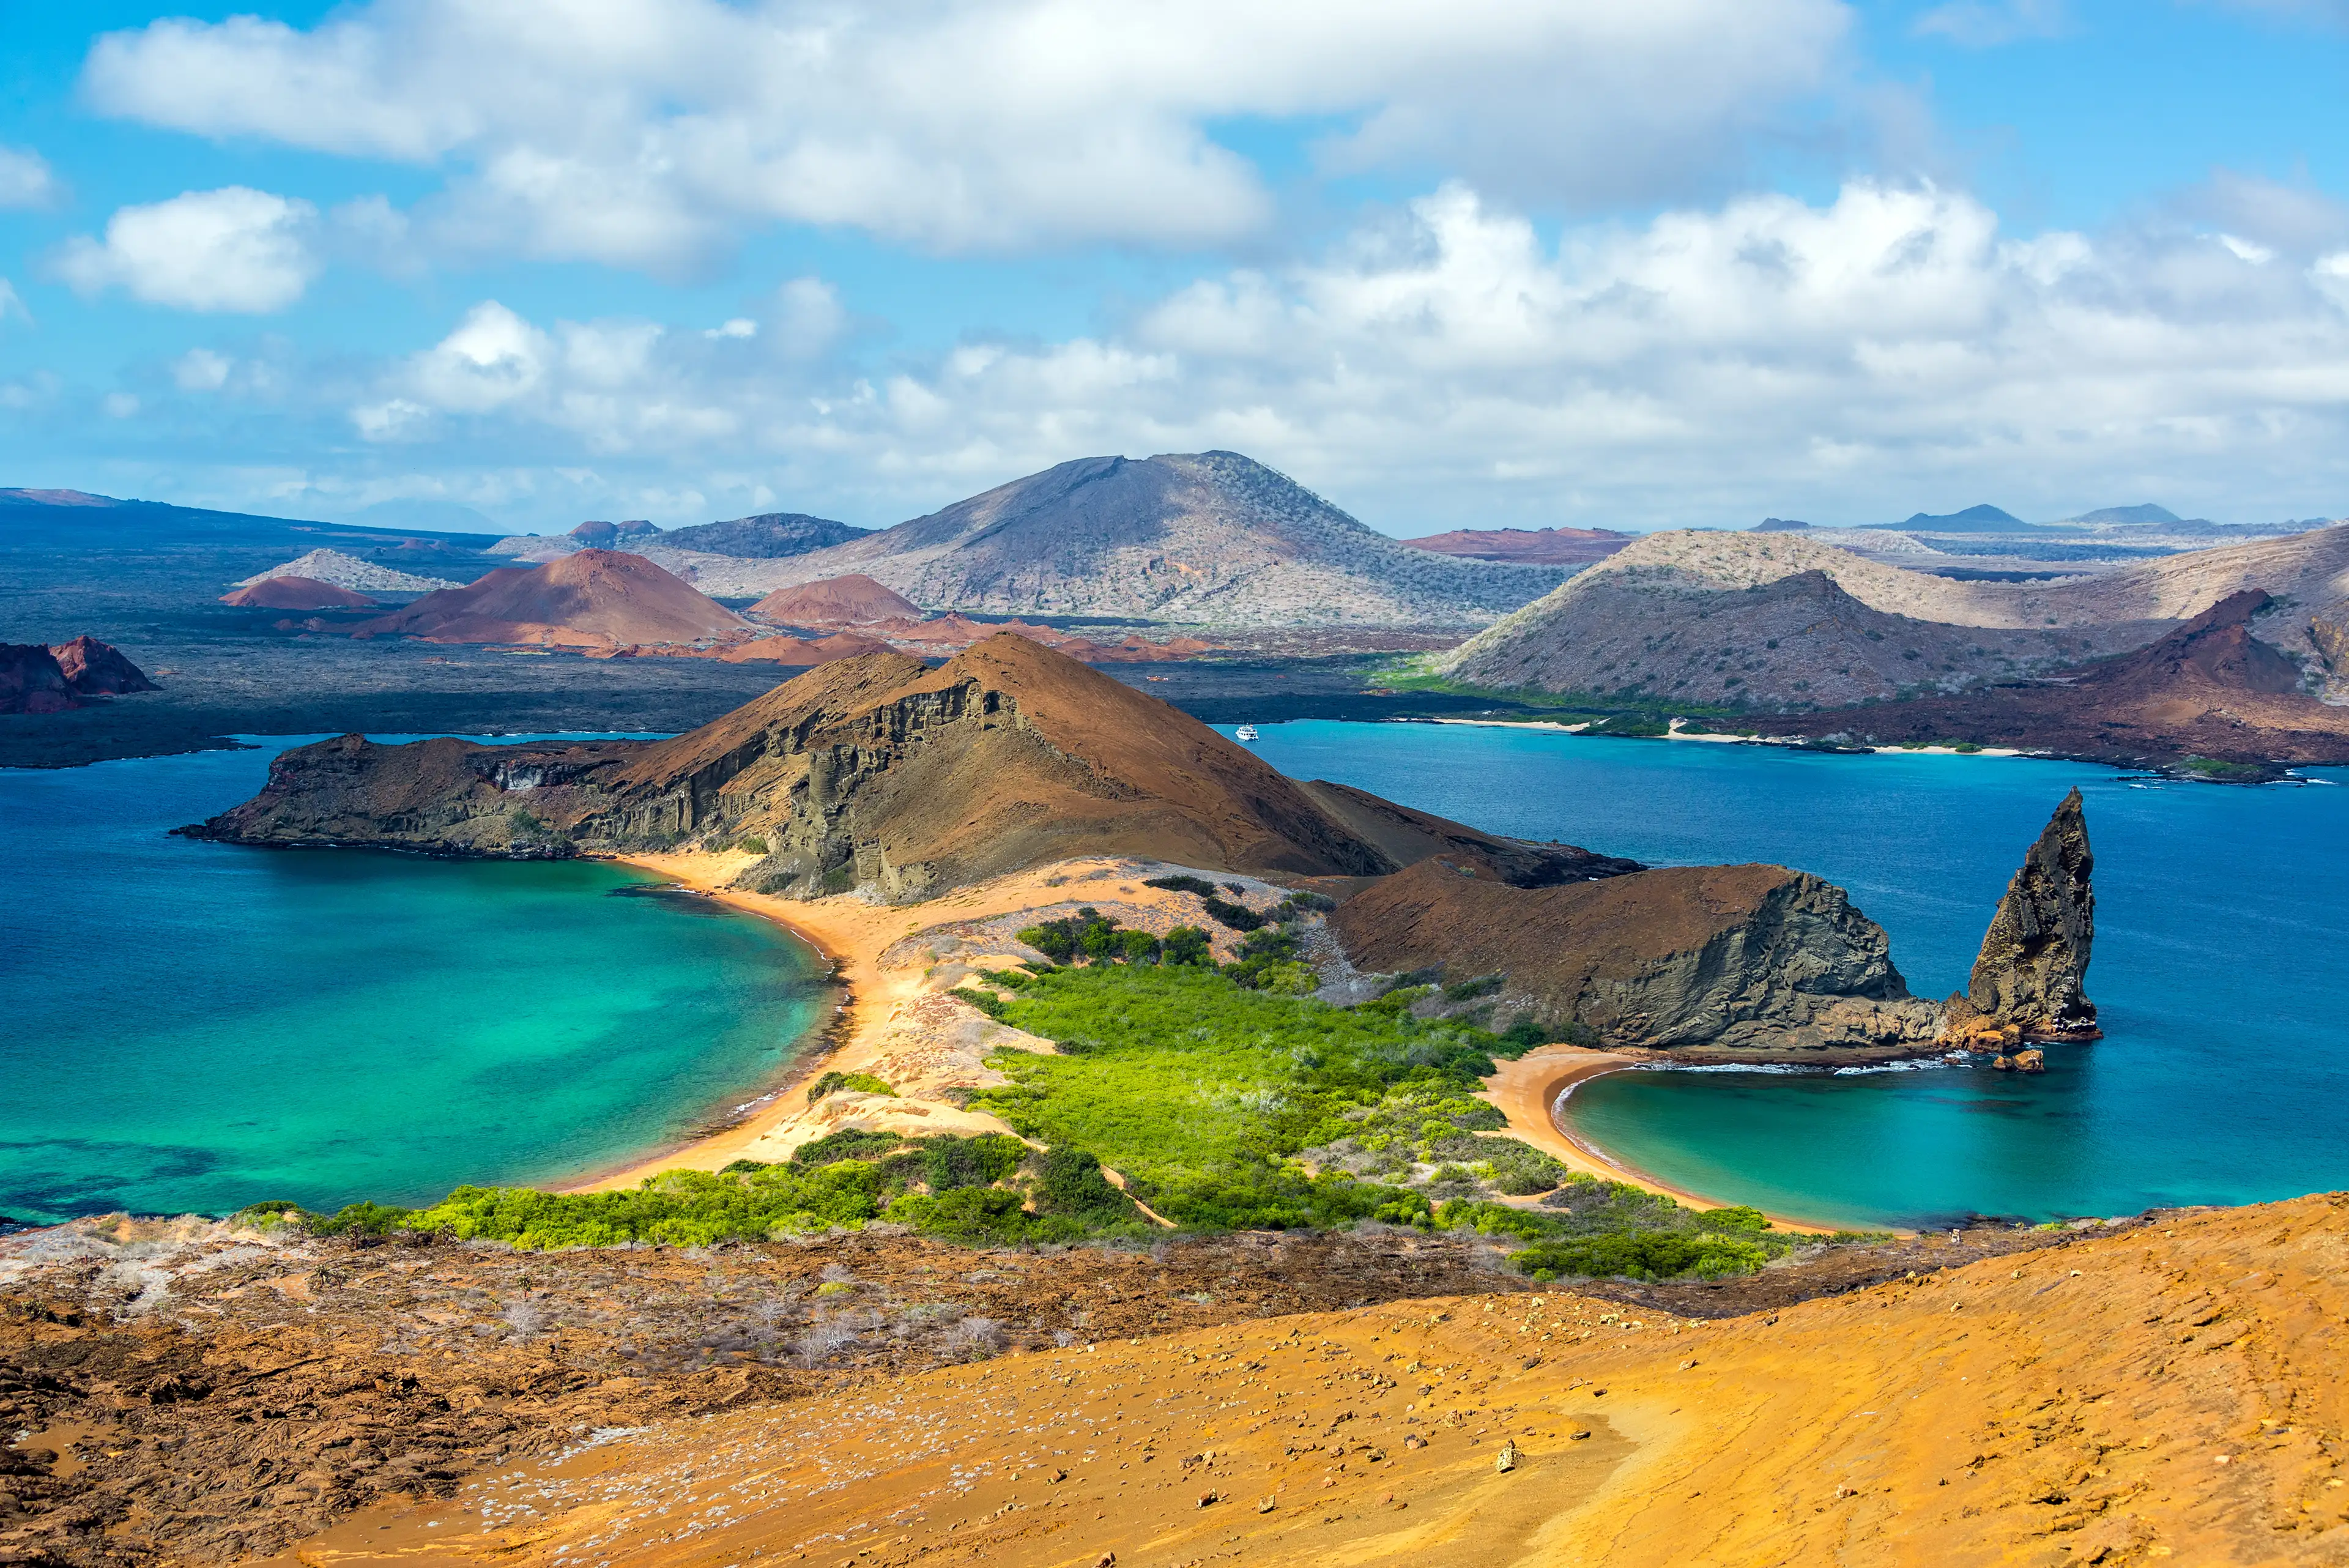 View of two beaches on Bartolome Island in the Galapagos Islands in Ecuador.